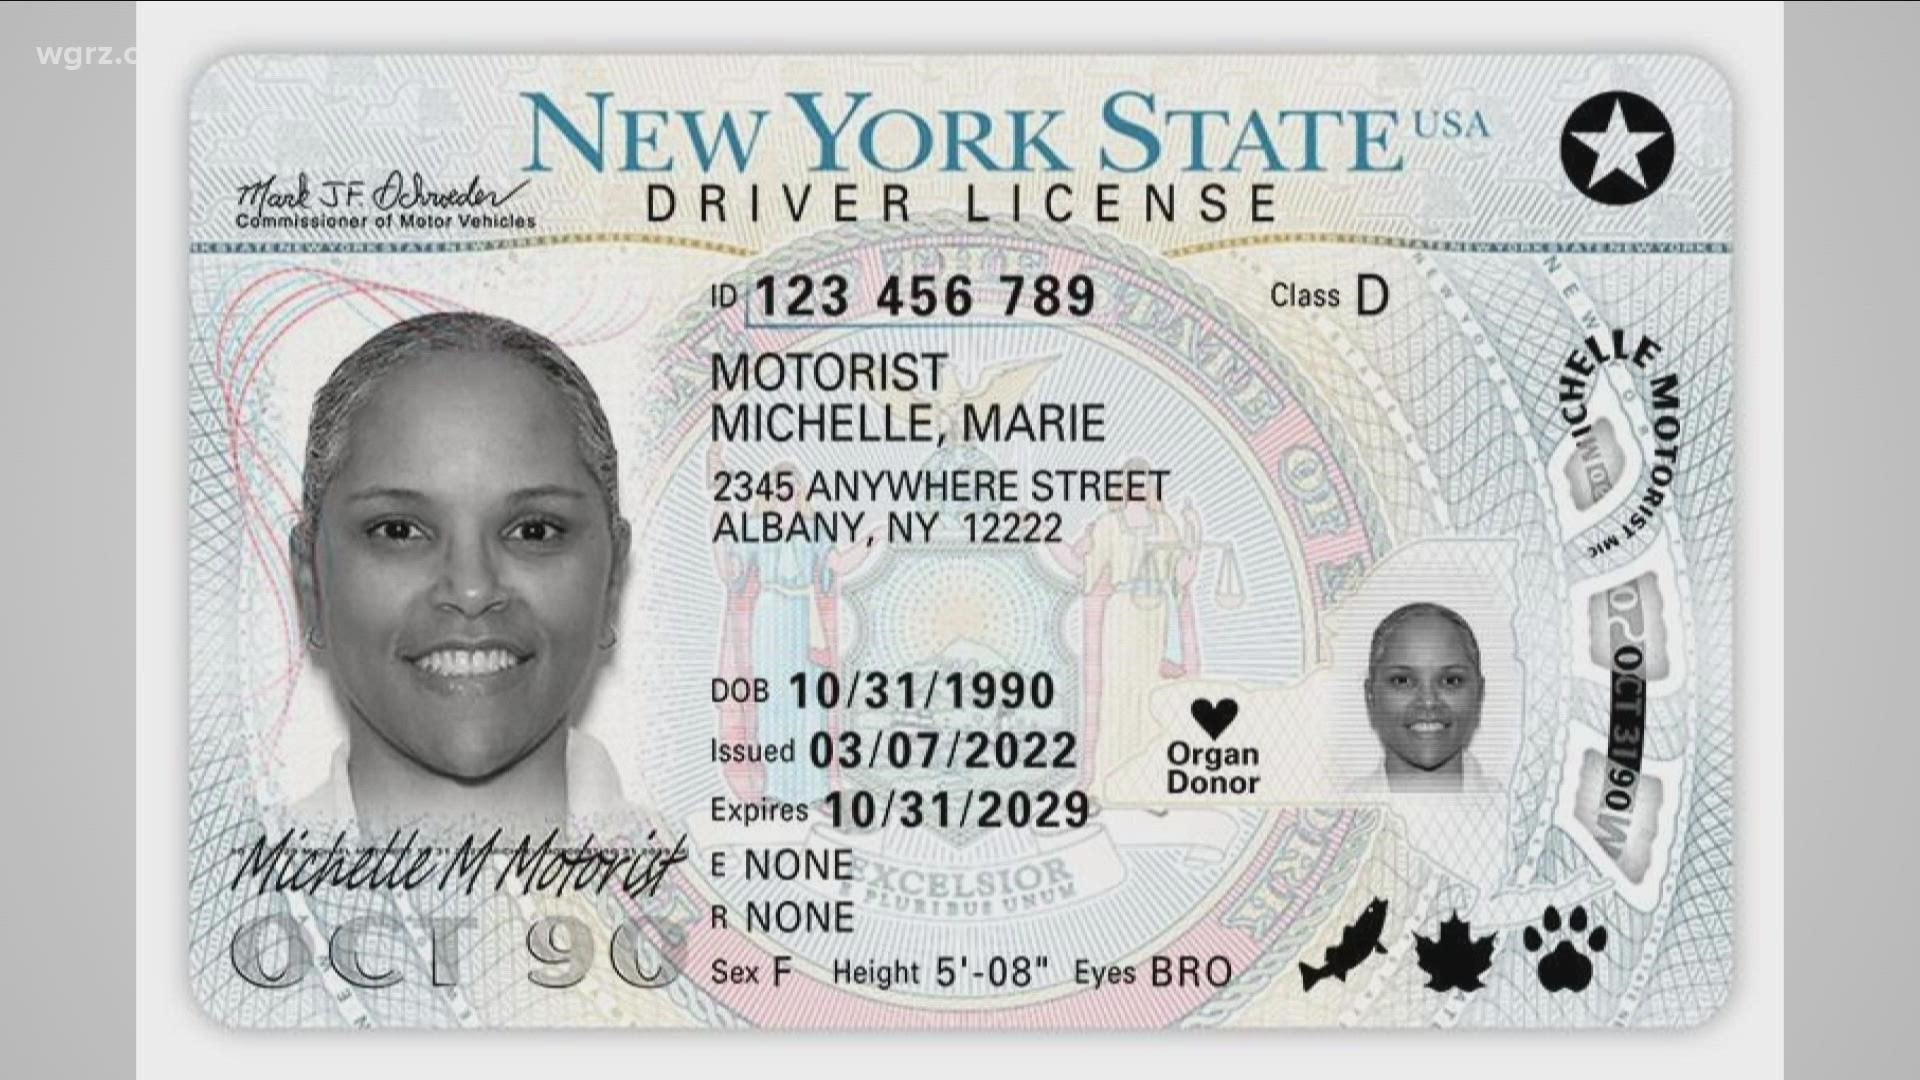 nys-announces-redesign-for-driver-s-license-wgrz